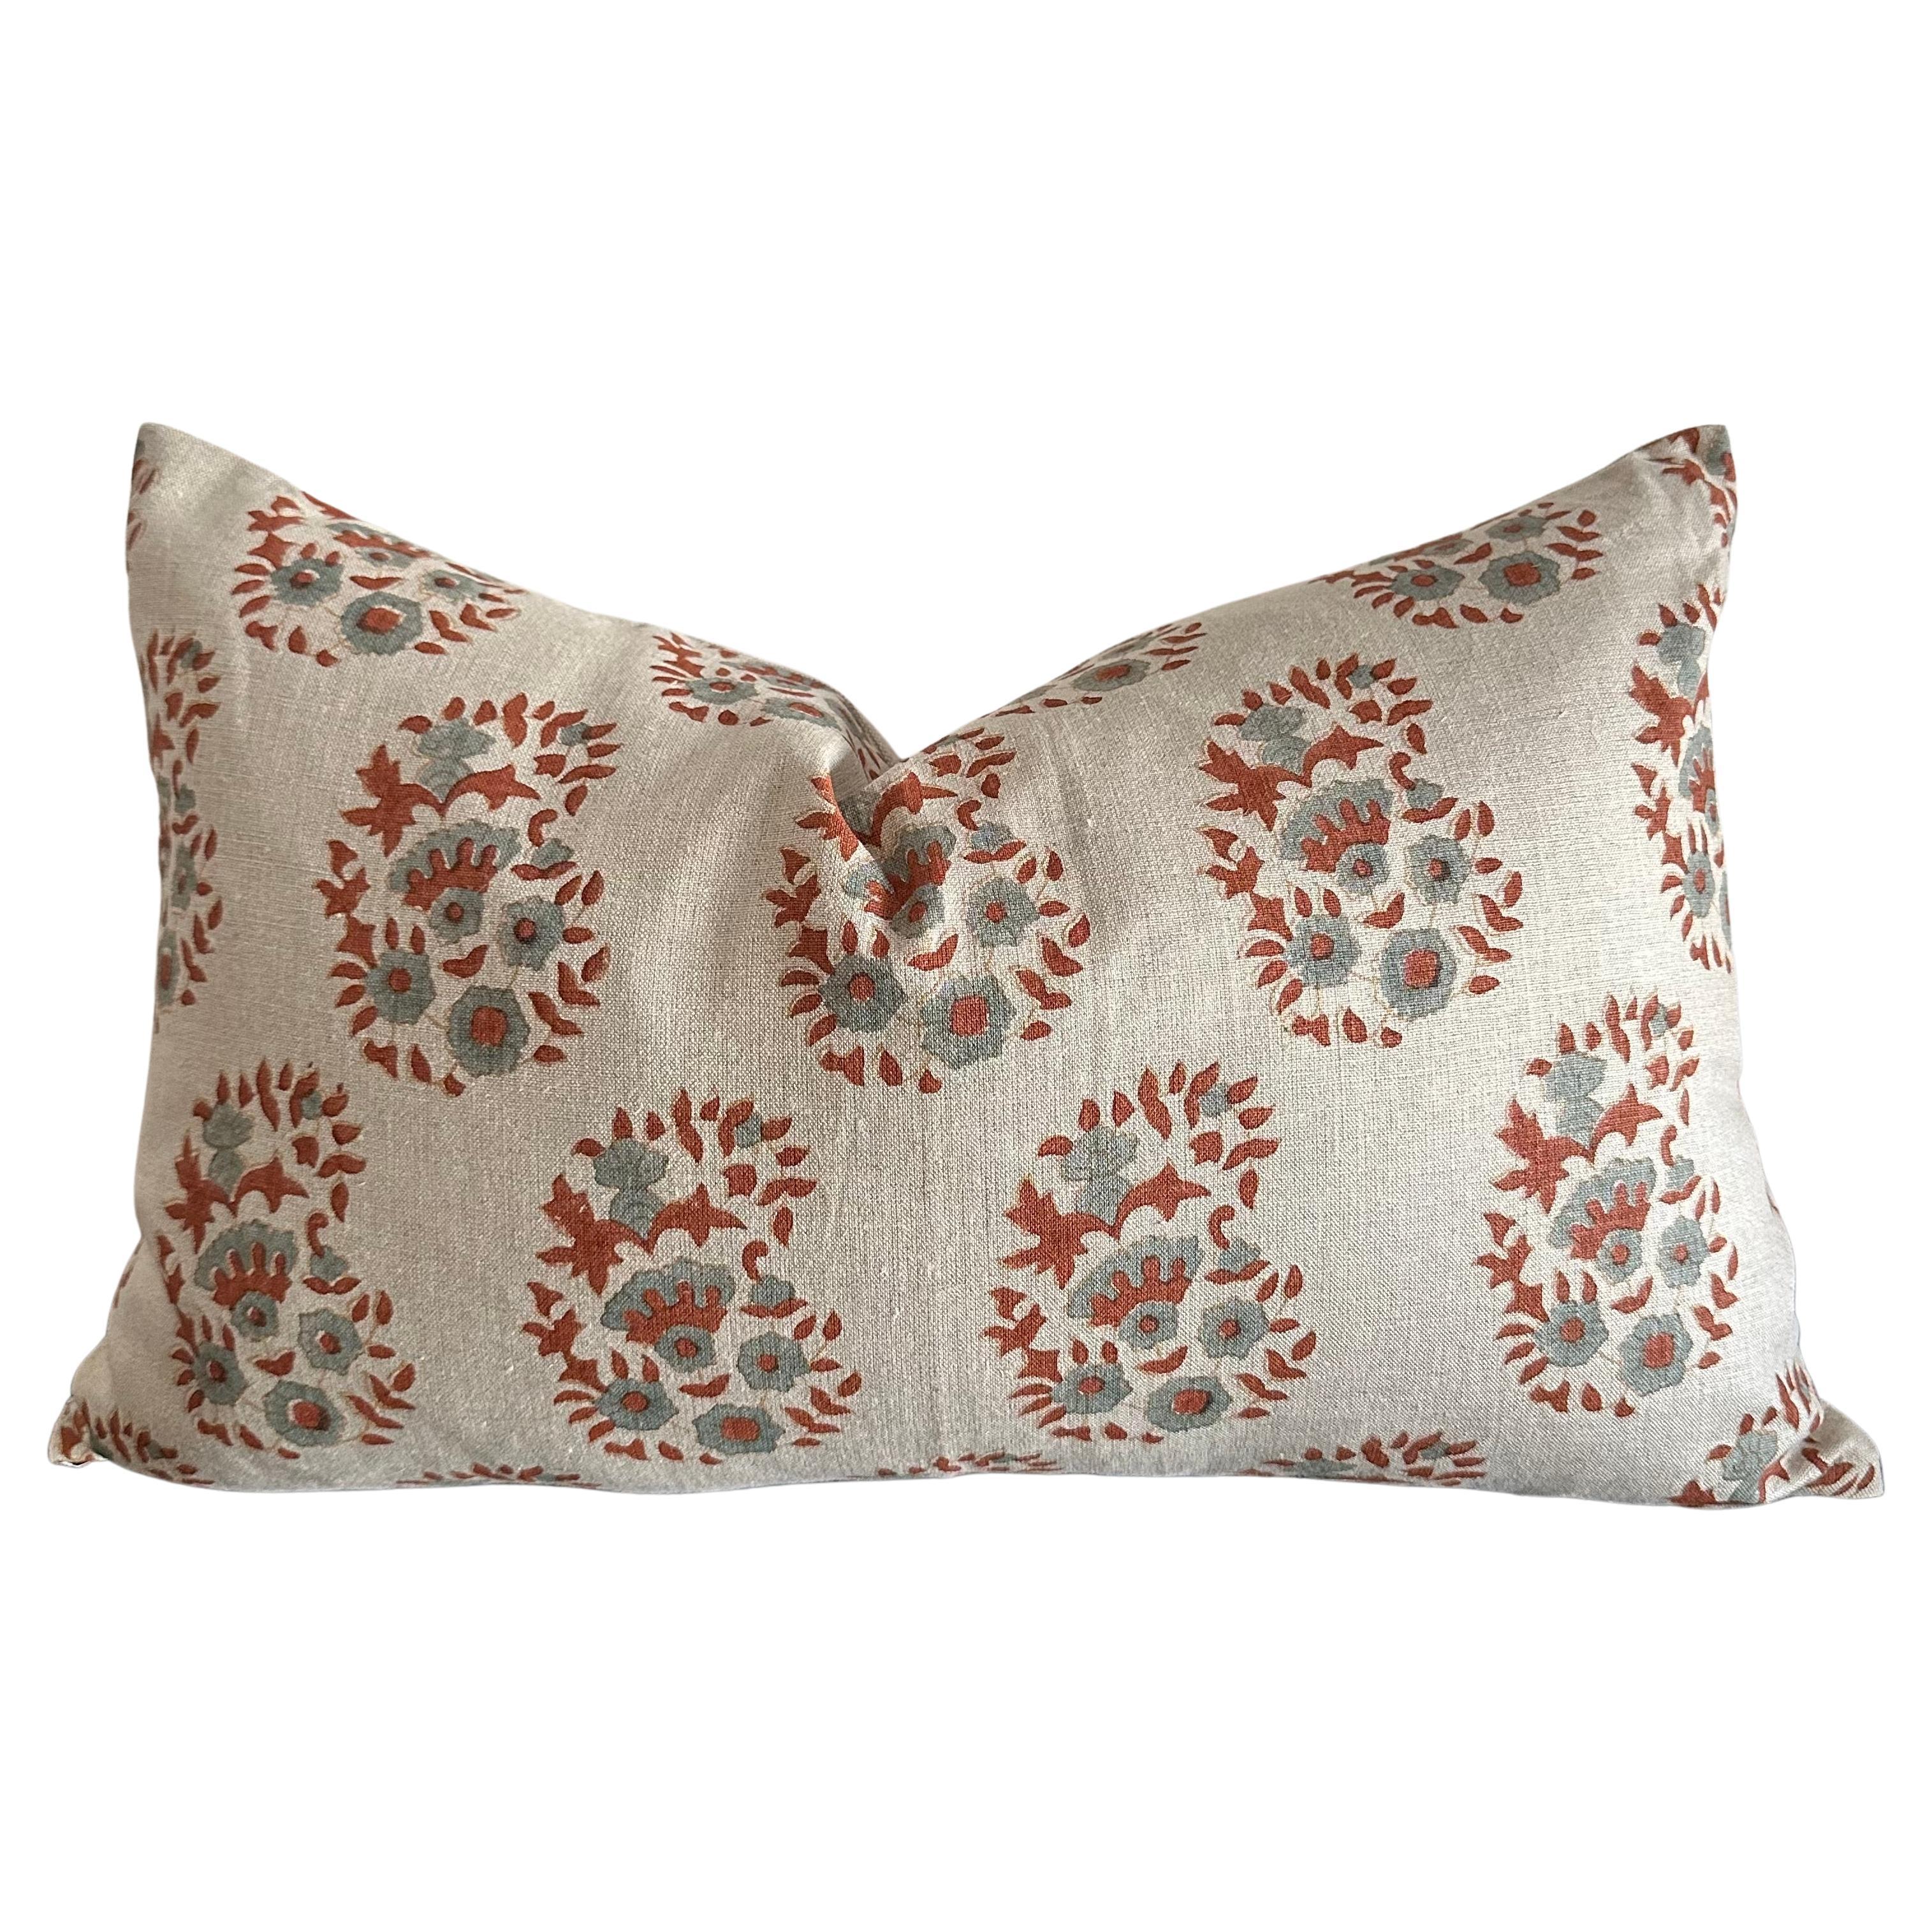 Coronado Block Printed Linen Lumbar Pillow with Down Feather Insert For Sale